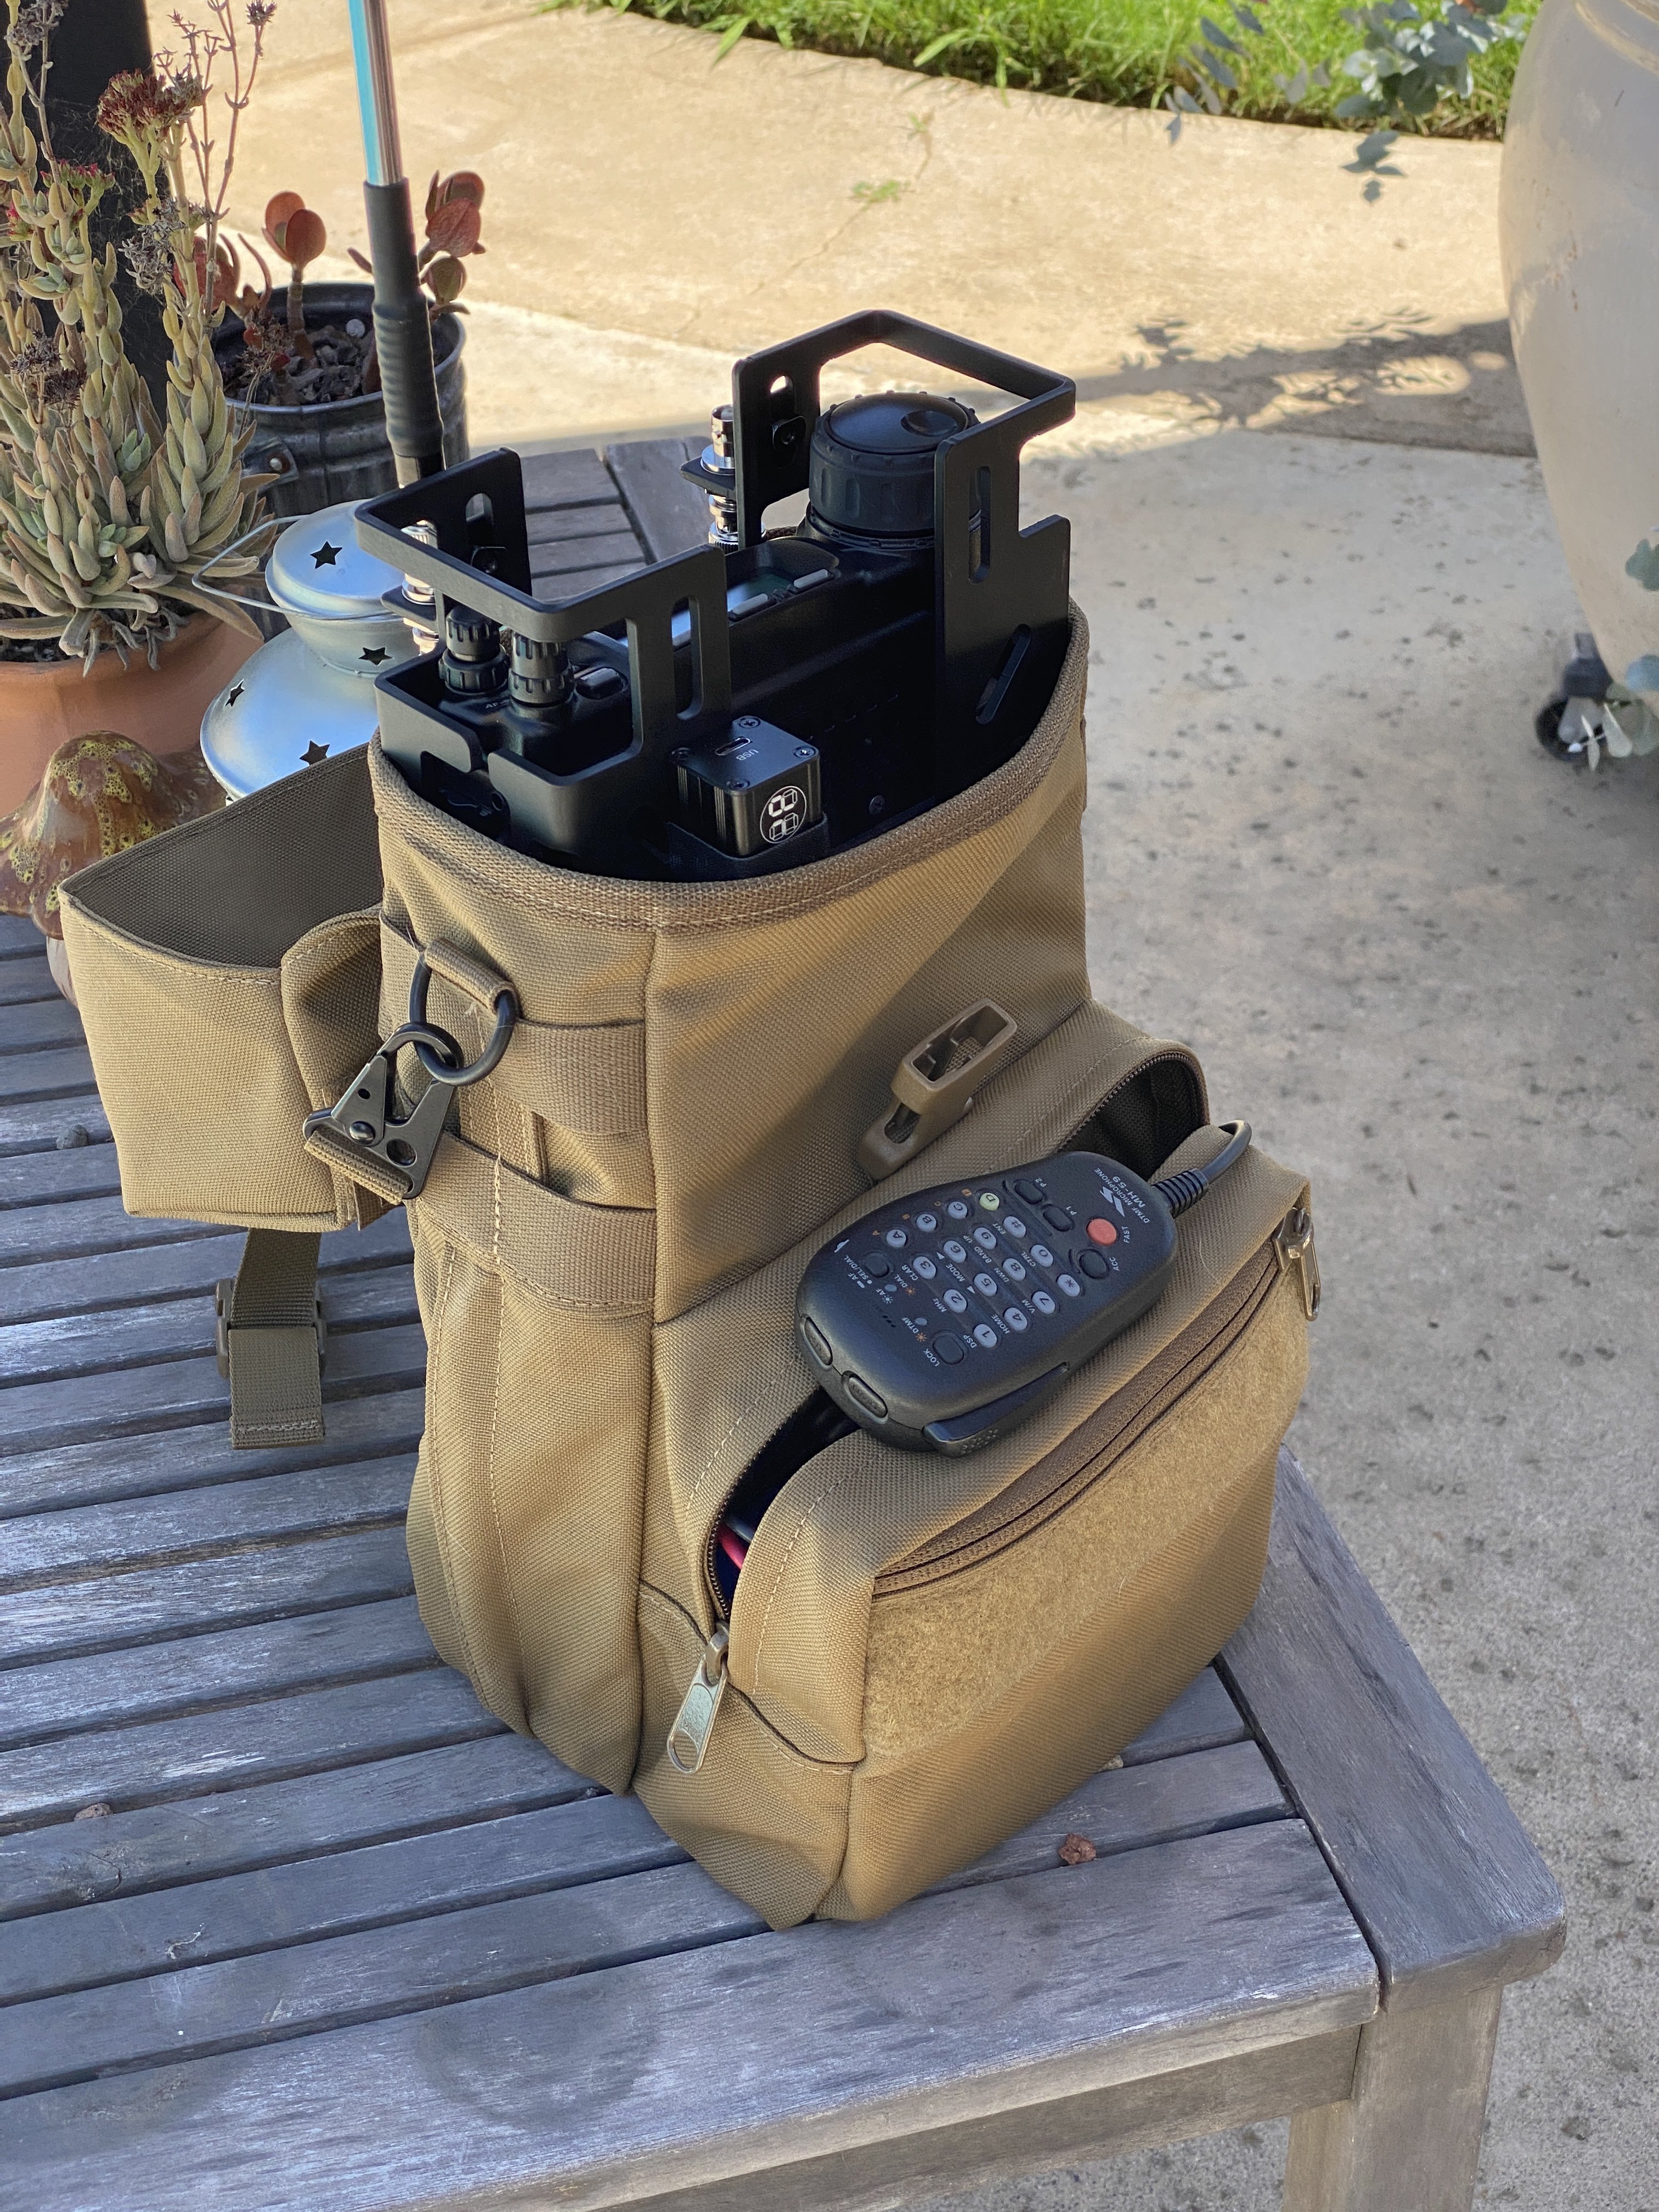 Portable pack with an all-mode ham radio capable of VHF, UHF, and HF frequencies inside a convenient grab-n-go bag and enough battery power to last most of a day